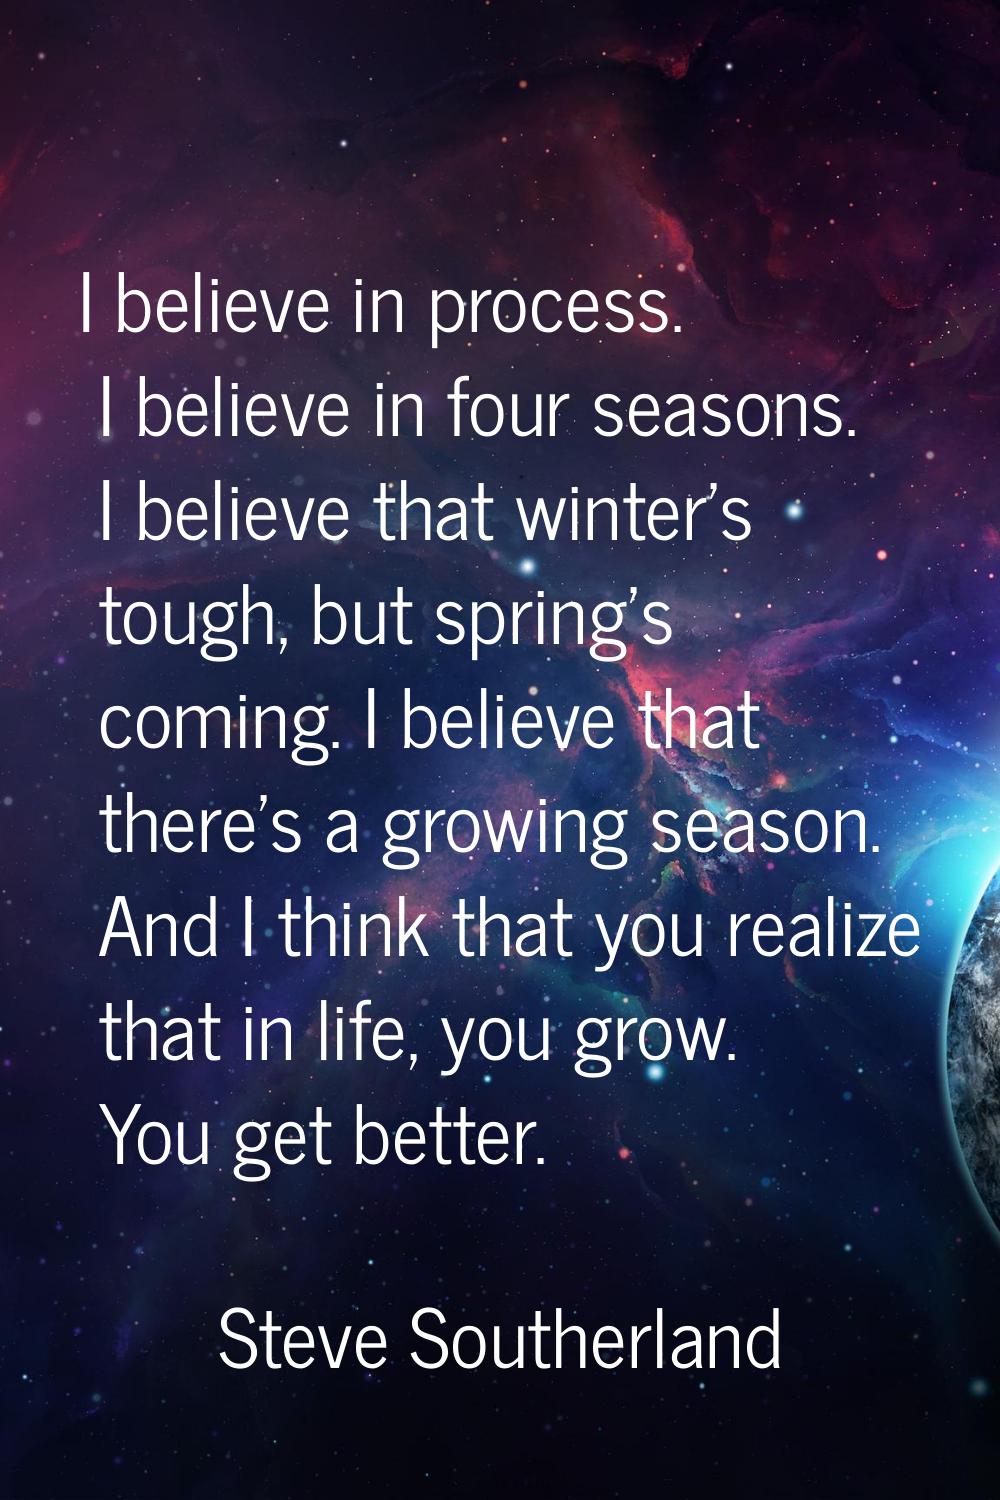 I believe in process. I believe in four seasons. I believe that winter's tough, but spring's coming